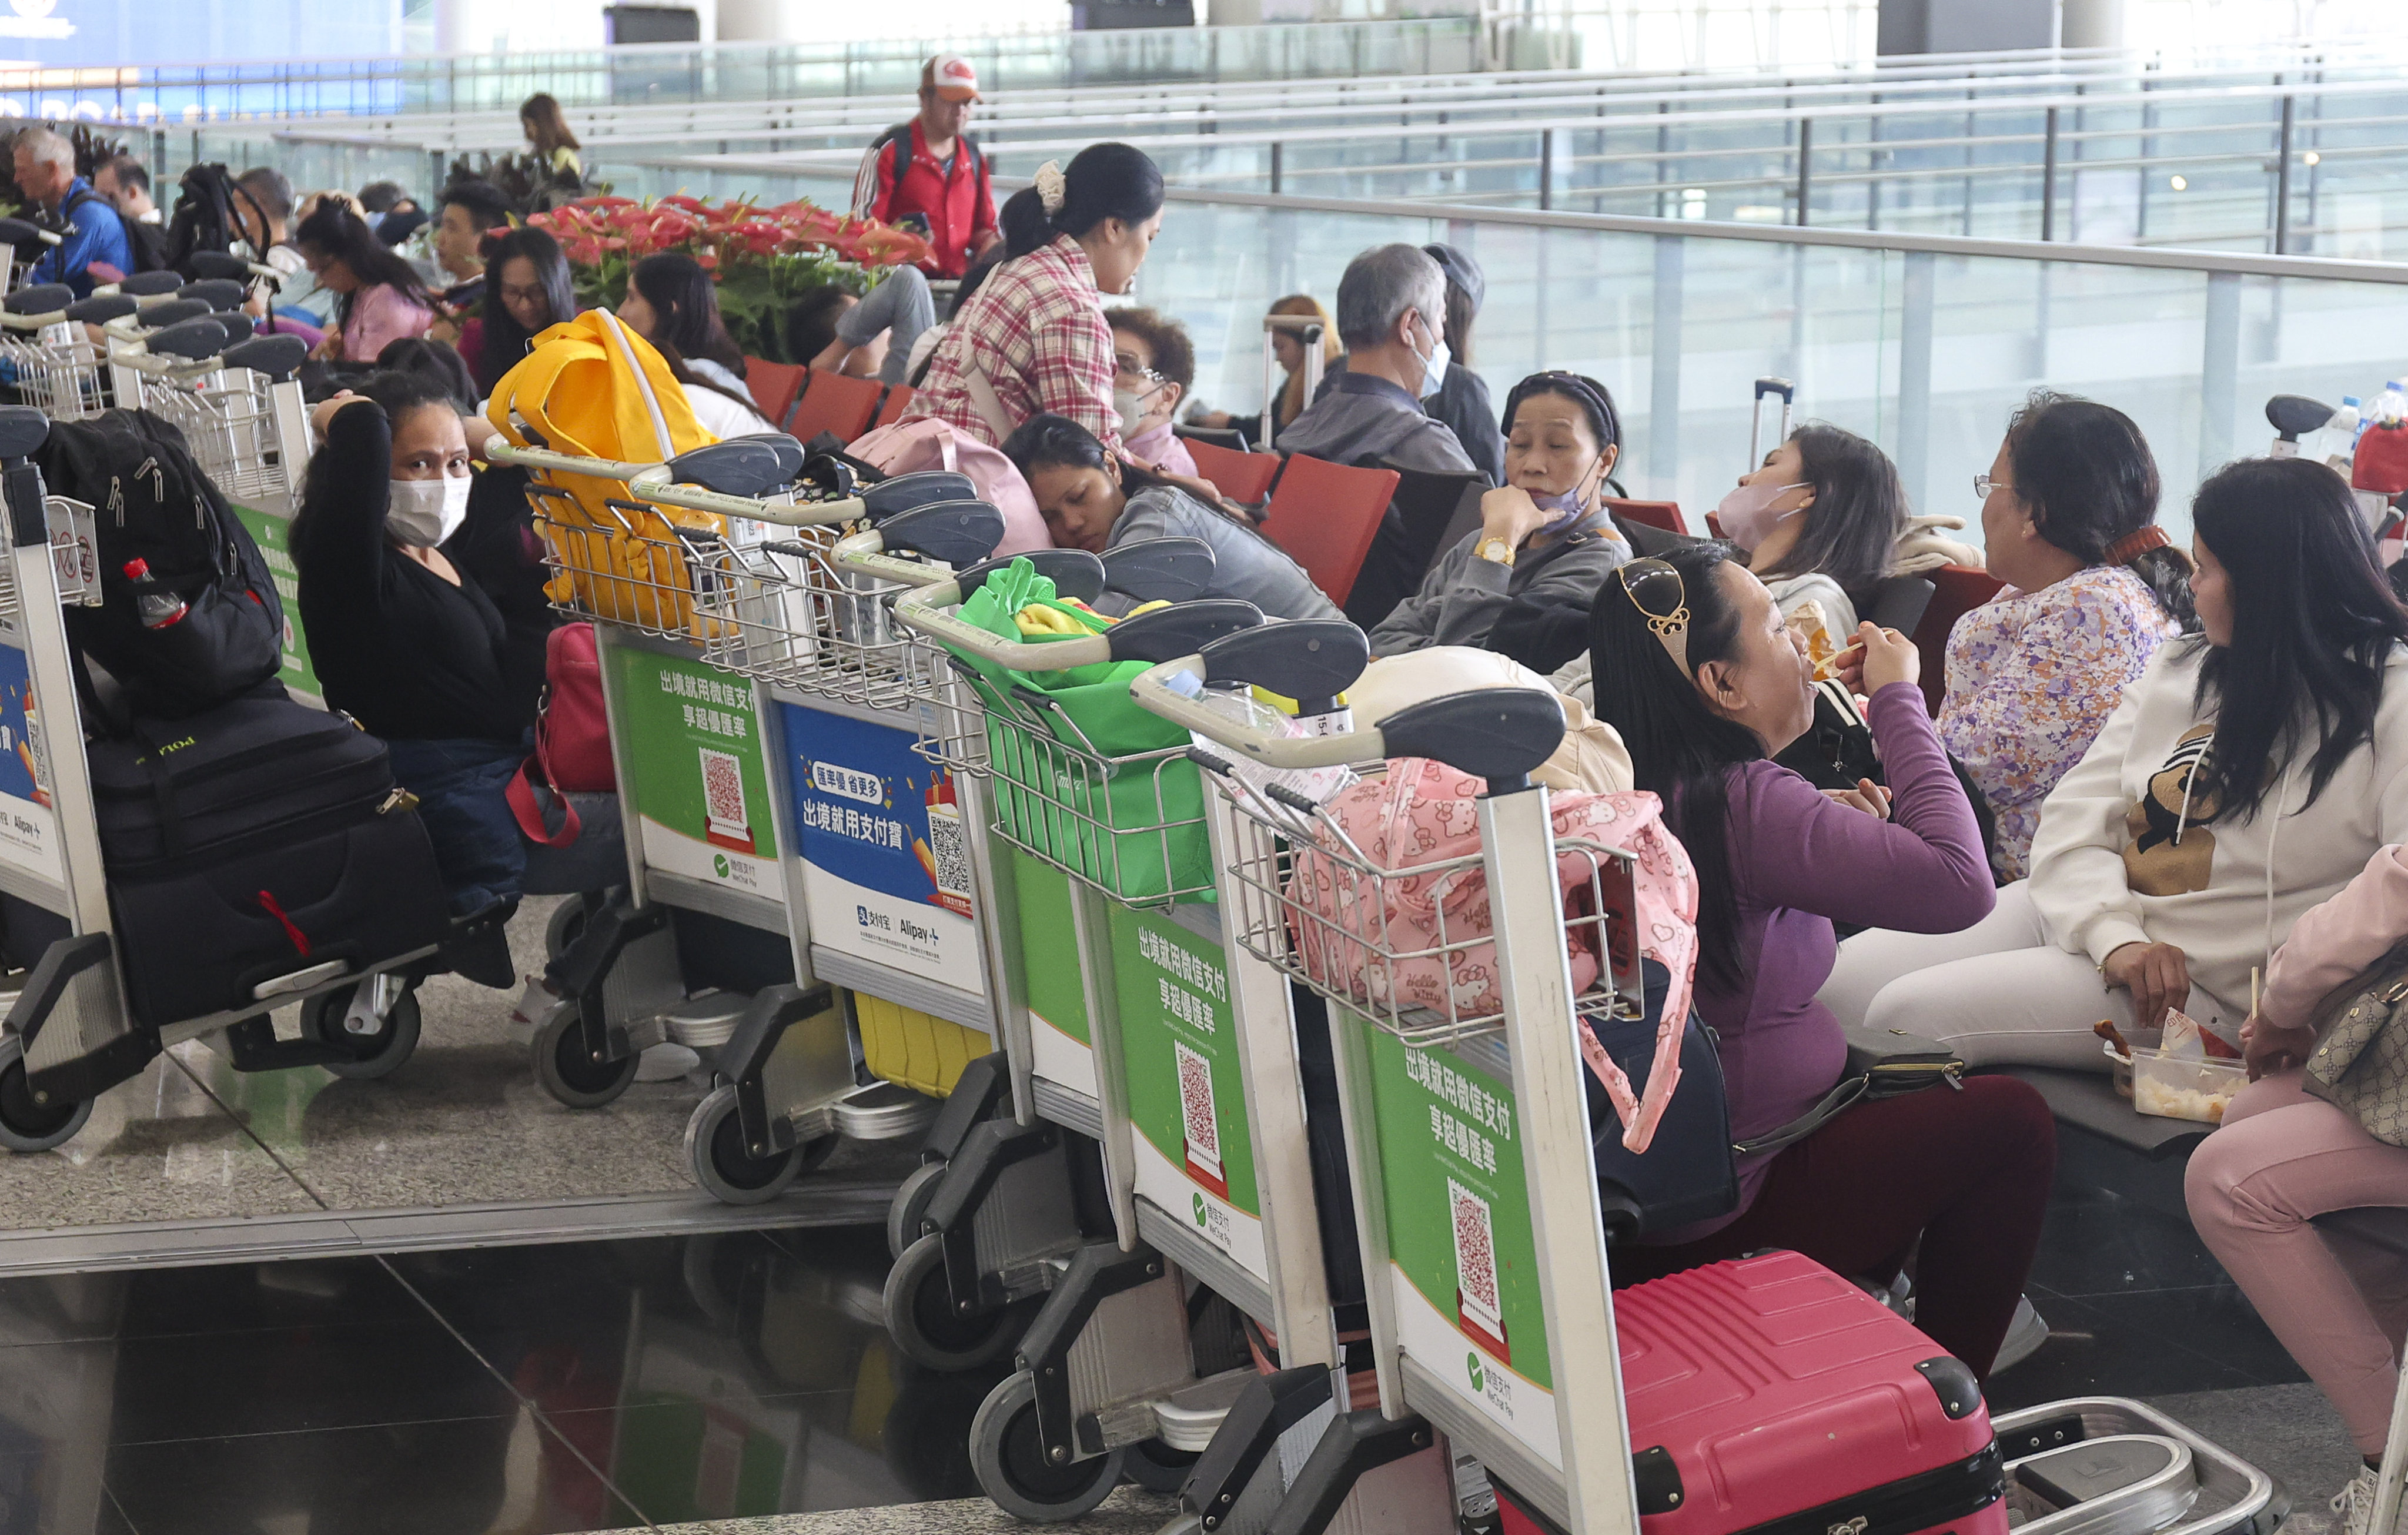 Stranded passengers at Hong Kong’s airport since Friday wait for flights to resume. Photo: Edmond So